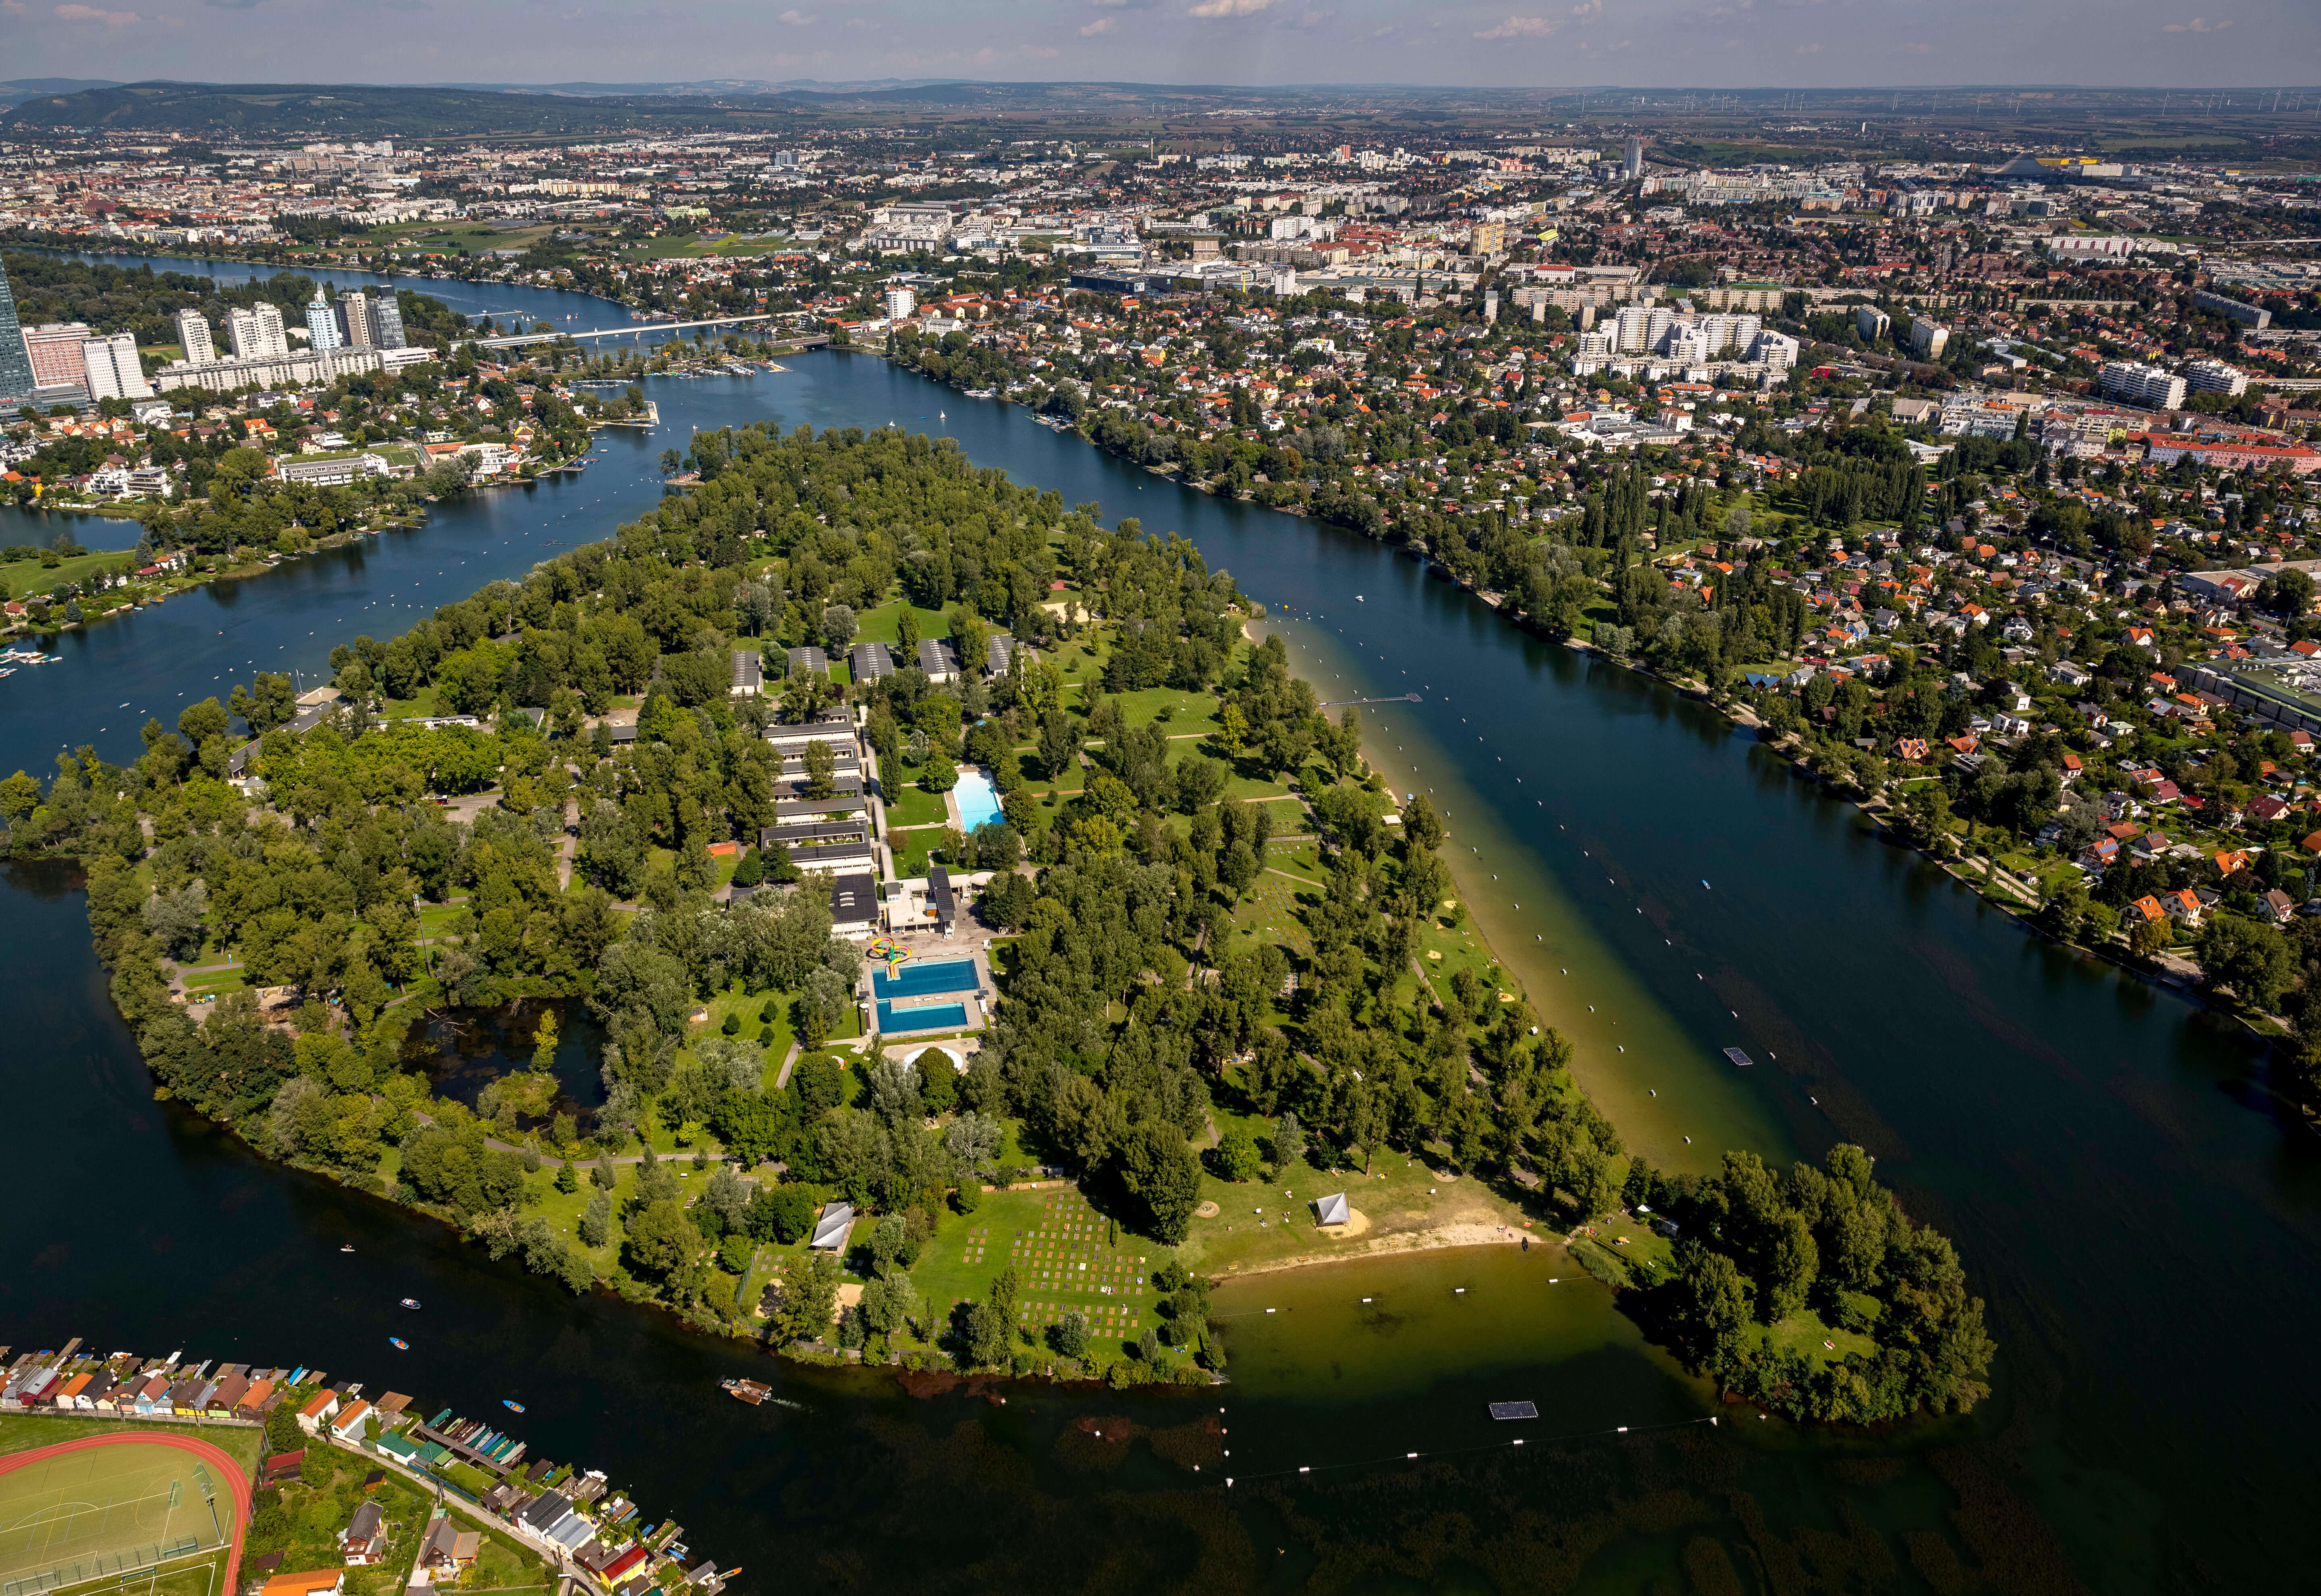 In the summer months, head to Strandbad Gänsehäufel for a dip in the Danube